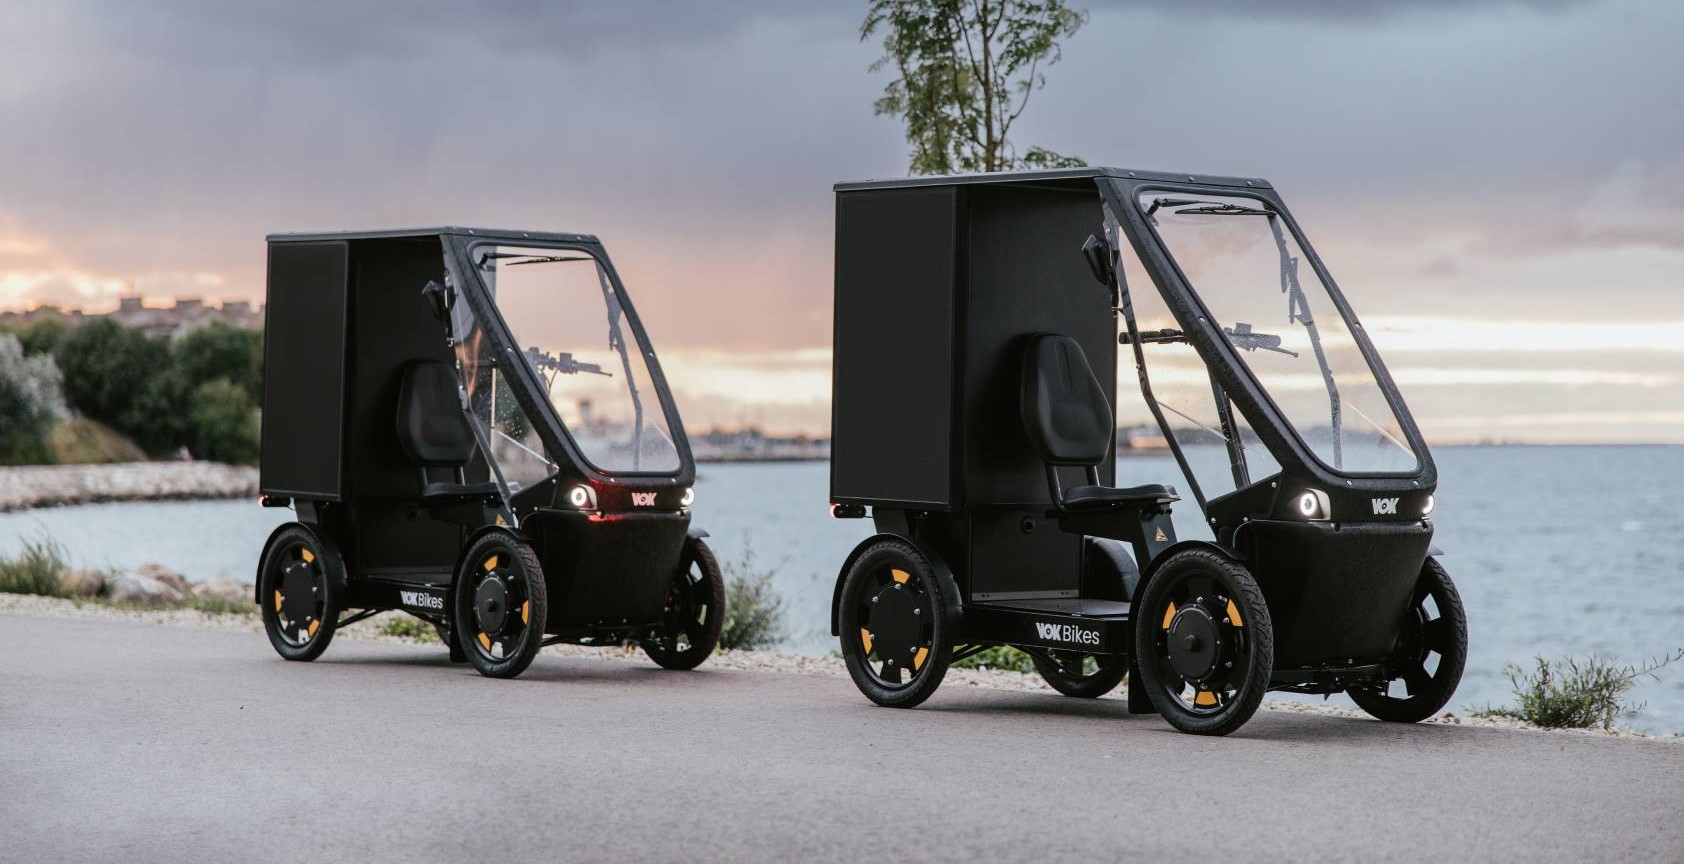 Vok electric quadricycles with a roof and rear cargo box